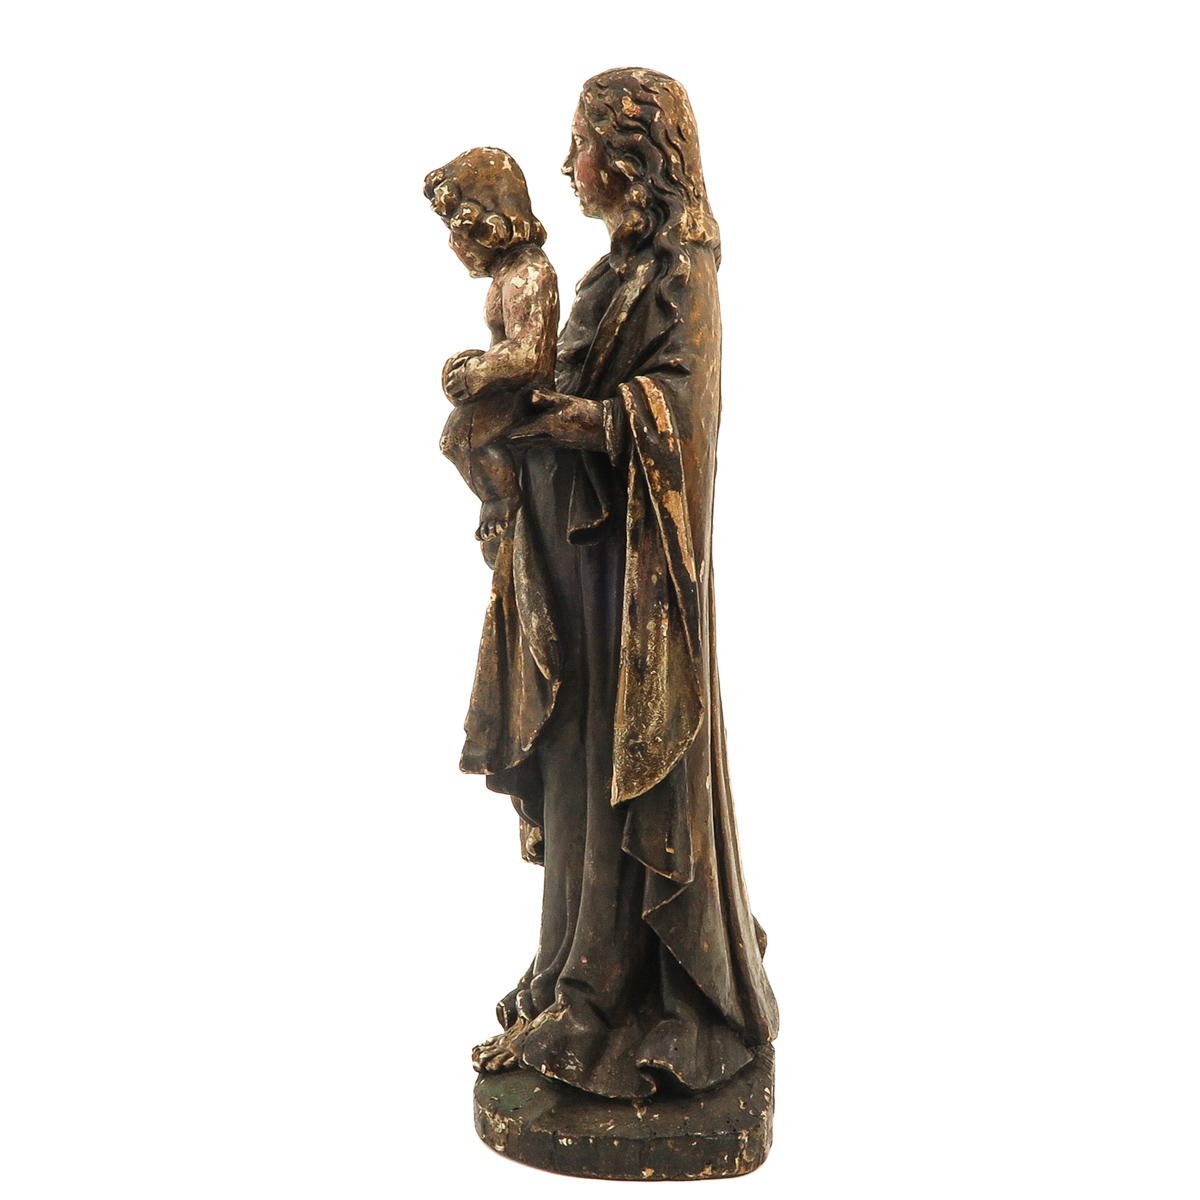 A Sculpture of Mary with Child - Image 2 of 9